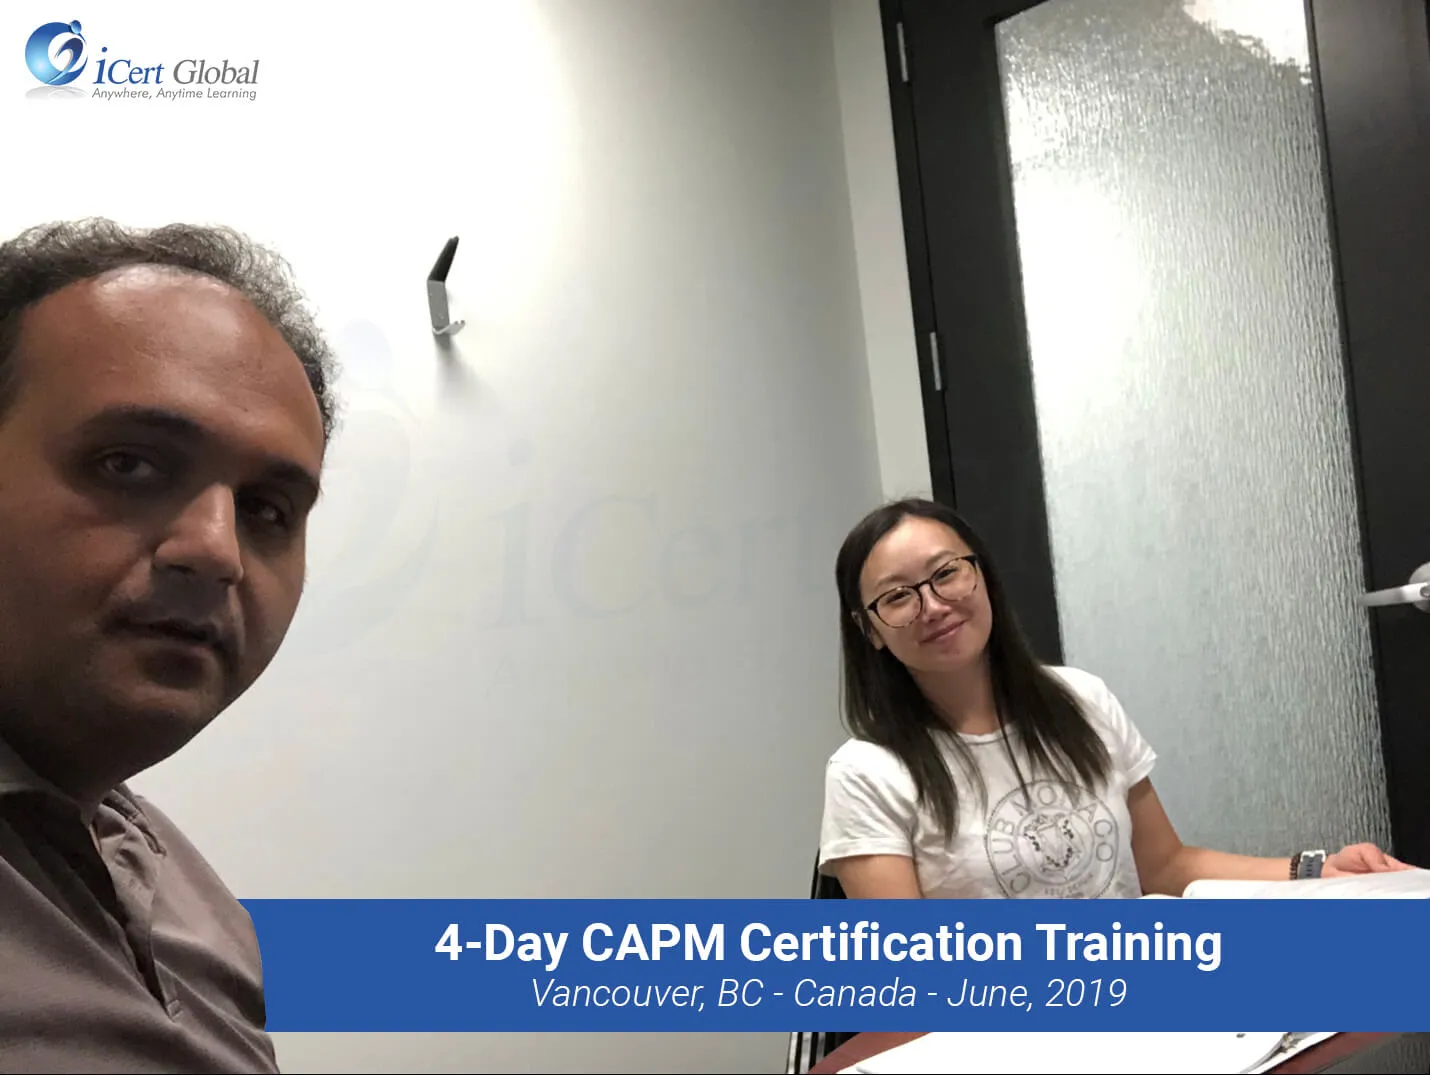 CAPM Certification Training Classroom Course in Vancouver, BC, Canada - June 2019 